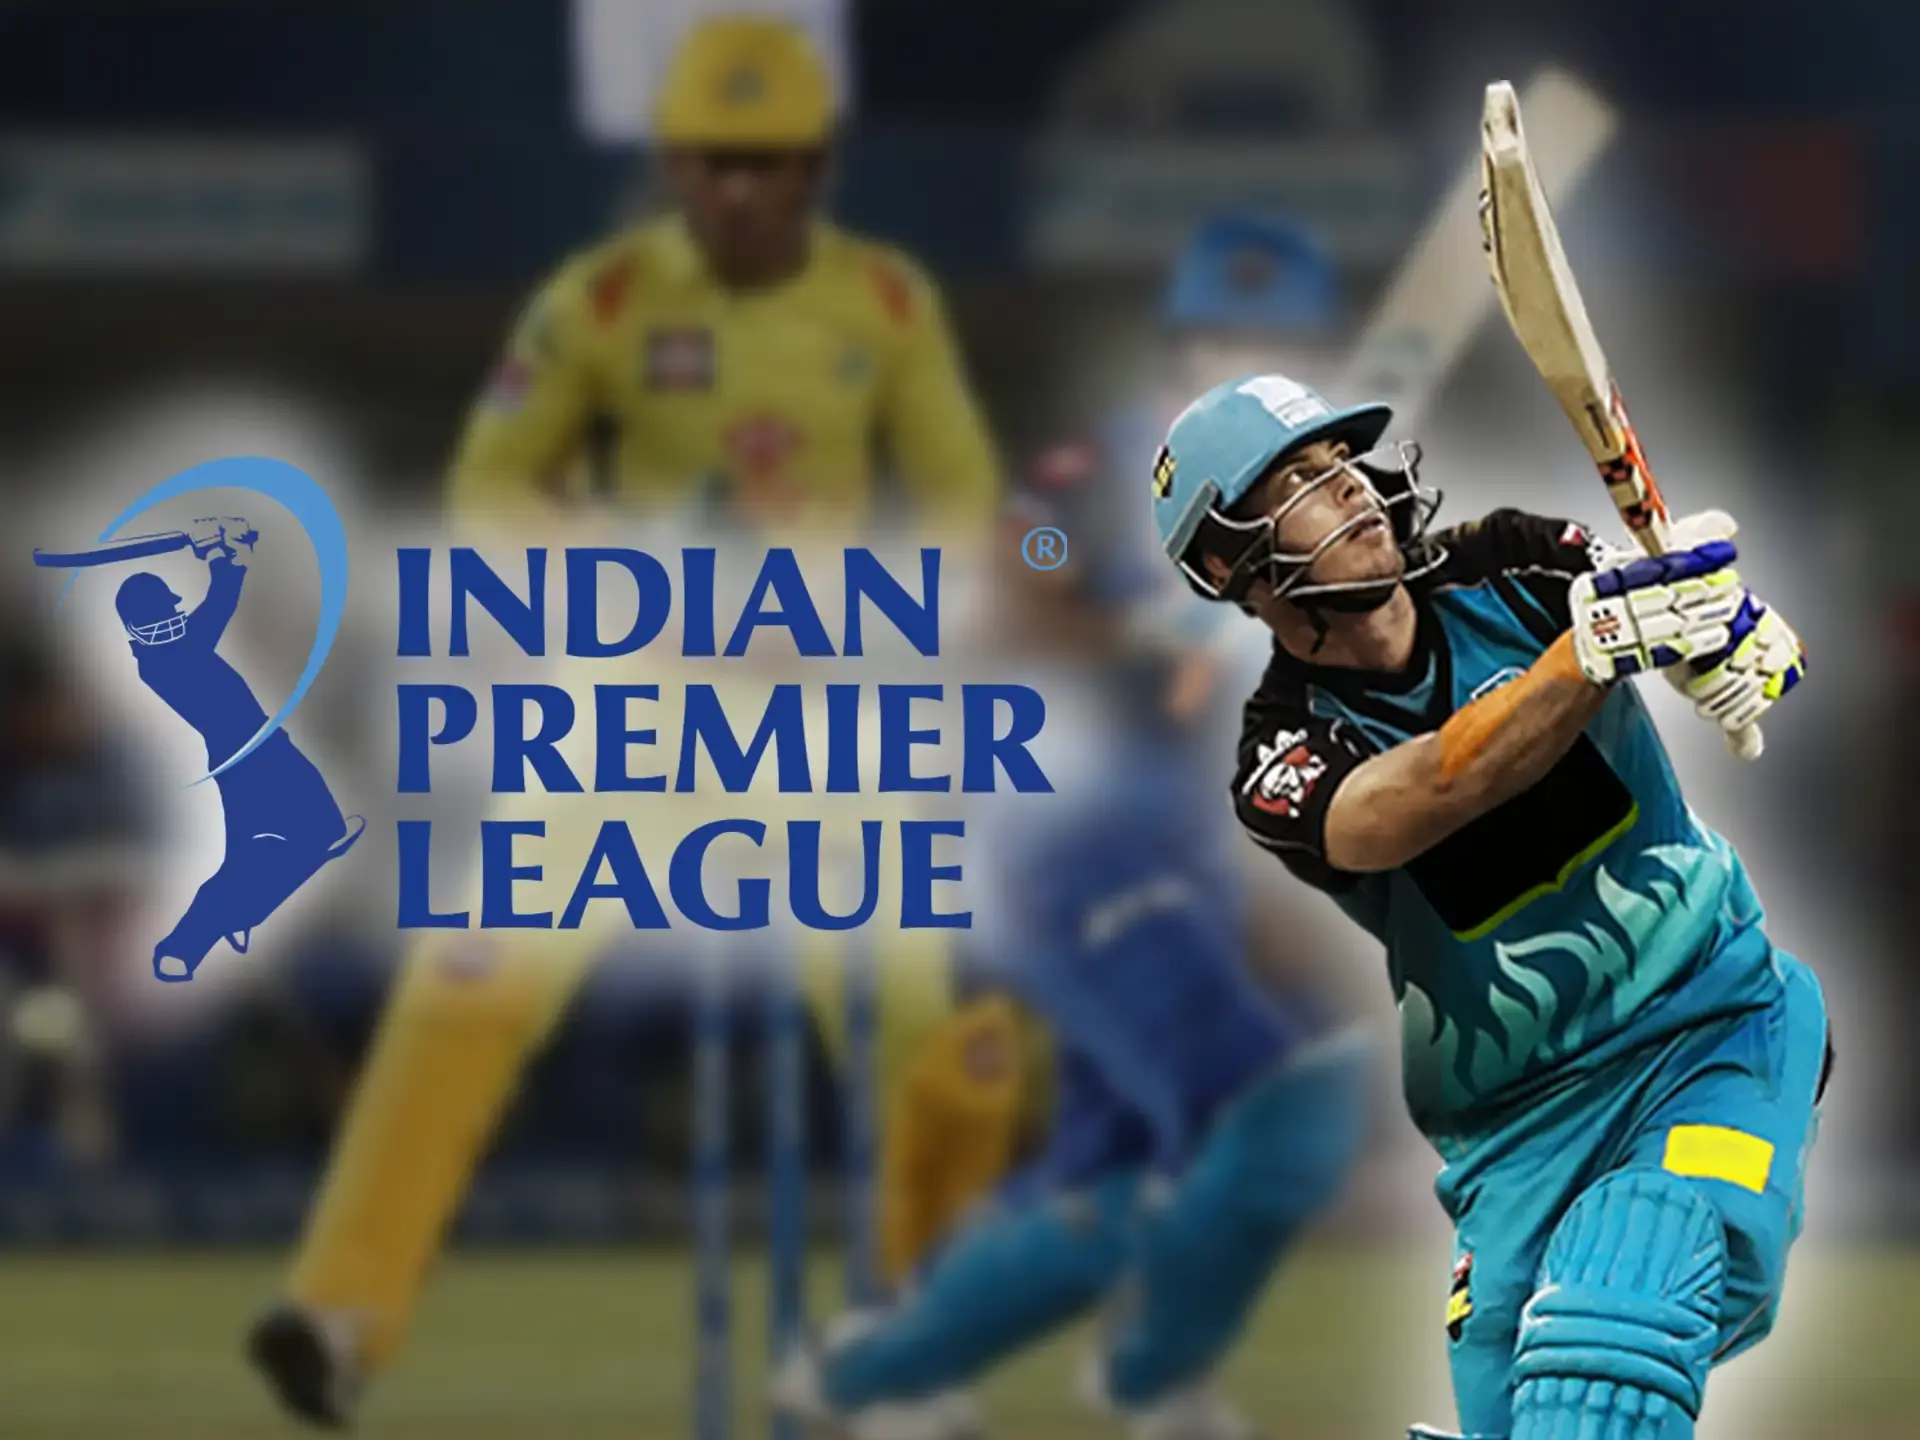 You can bet on the Indian Premier League (IPL) tournament.